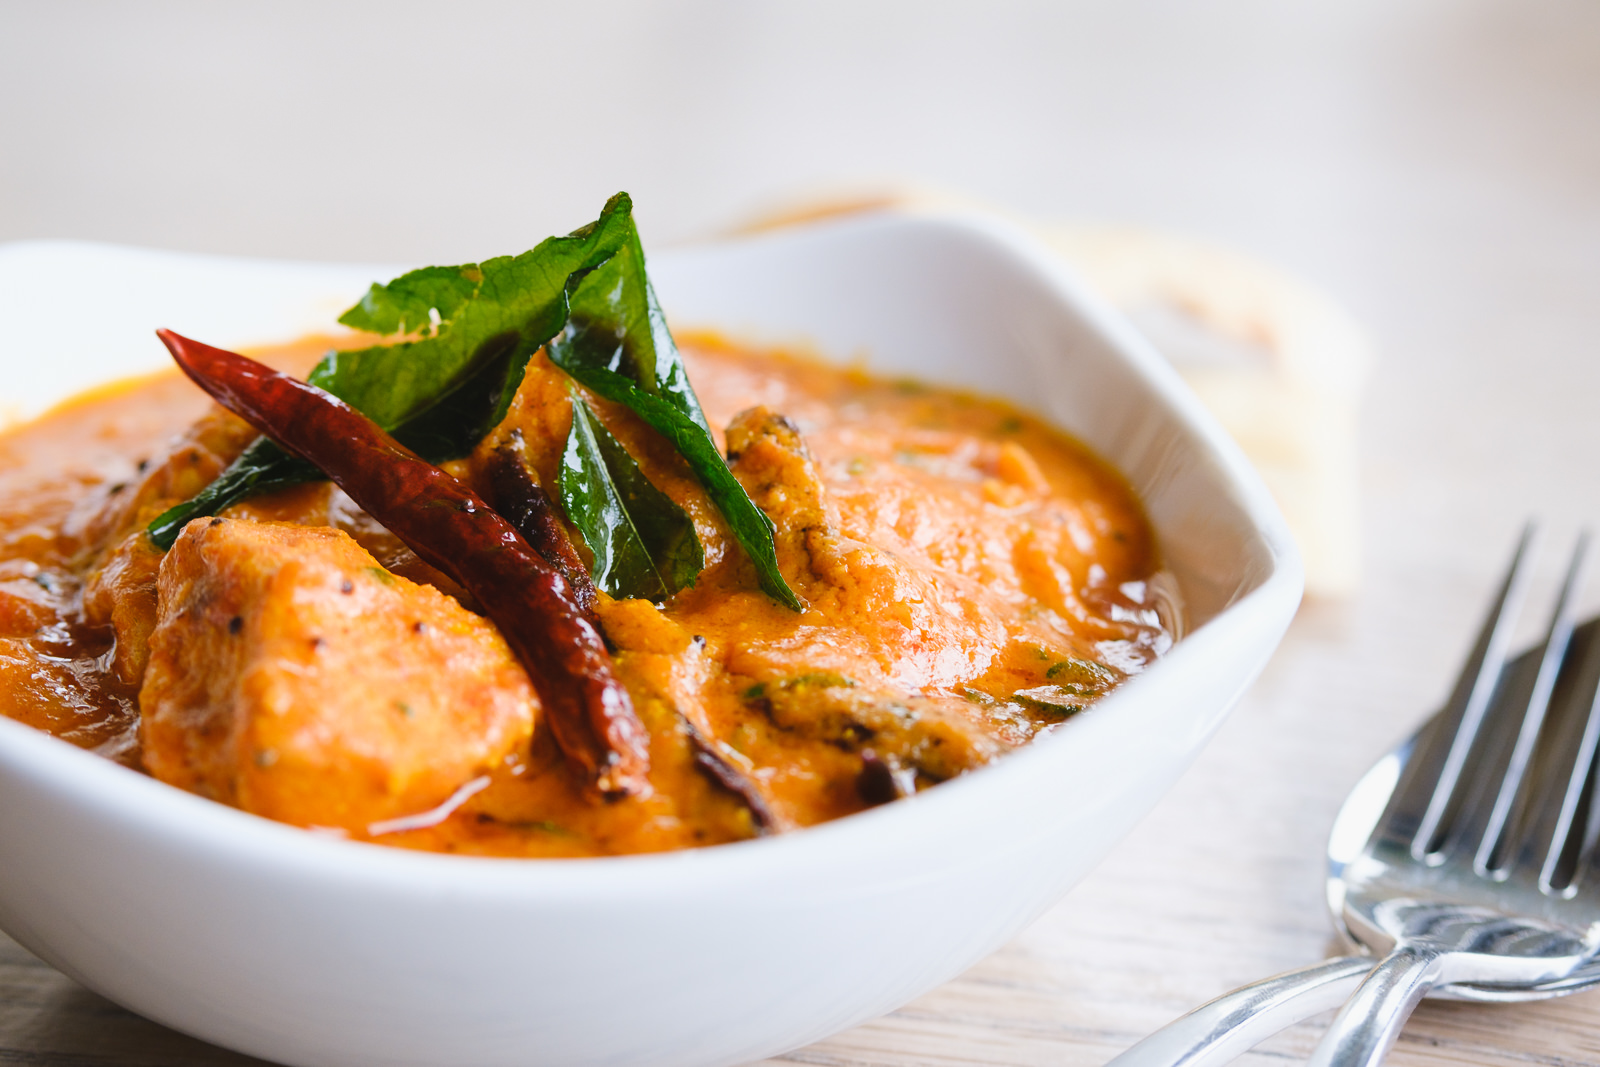 Corporate marketing photography with sample dishes at Mantra Indian Restaurant in Bath